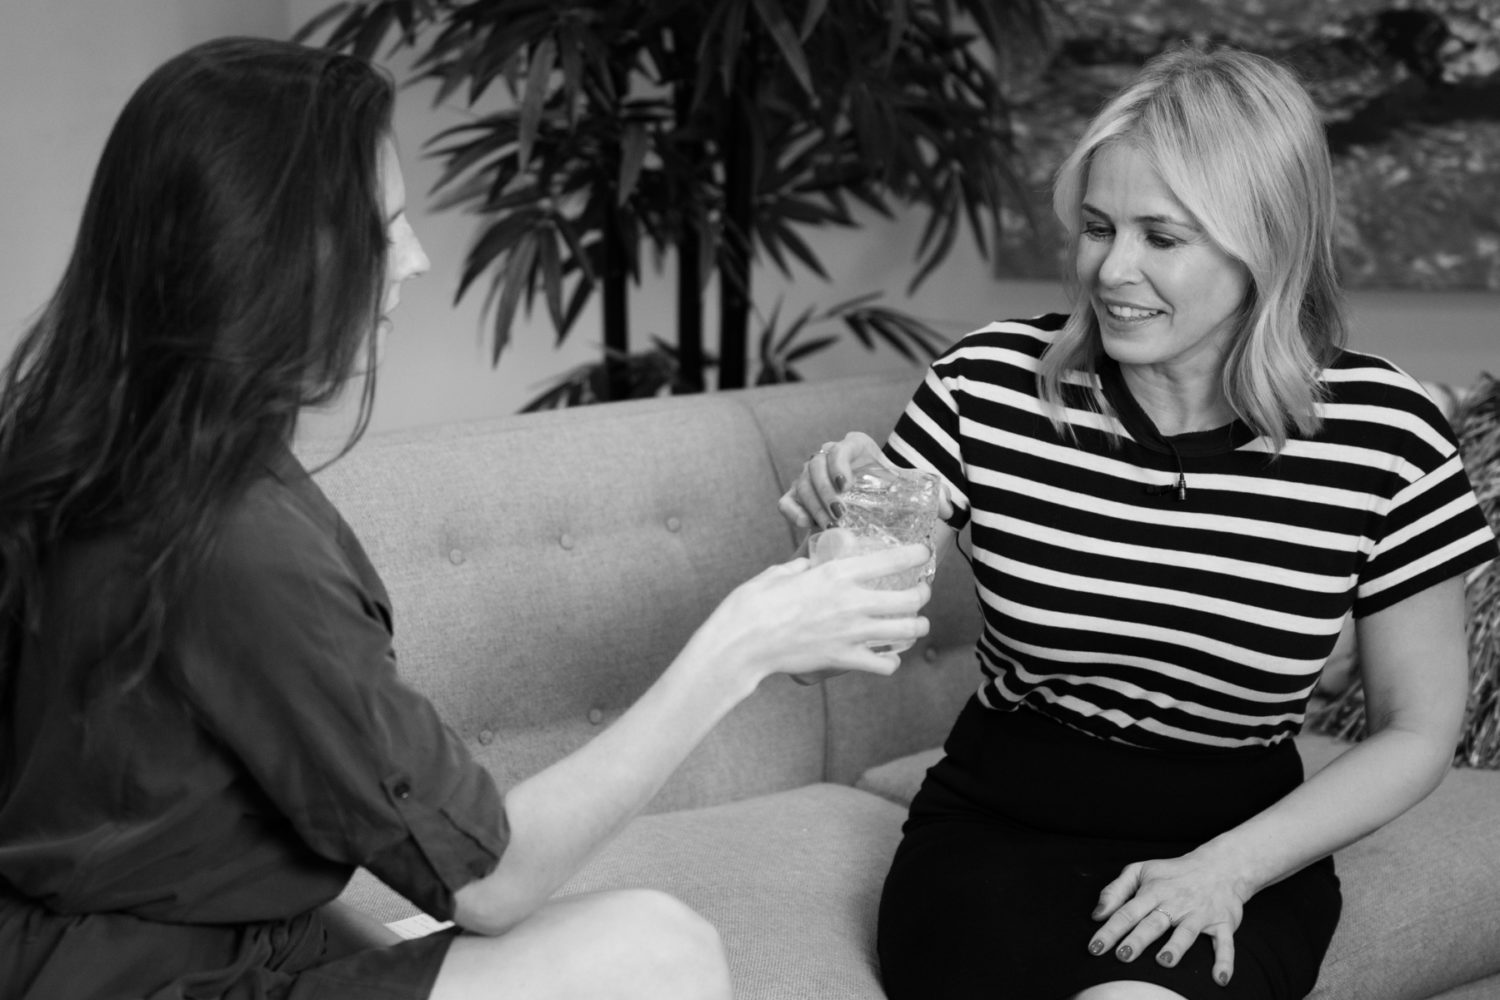 Hilary Sawchuk interviews Chelsea Handler for ADrinkWith.com on Tuesday, September 20th, 2016 at Sony Pictures Studio in Los Angeles, CA (Tyler Curtis/ @tyliner)